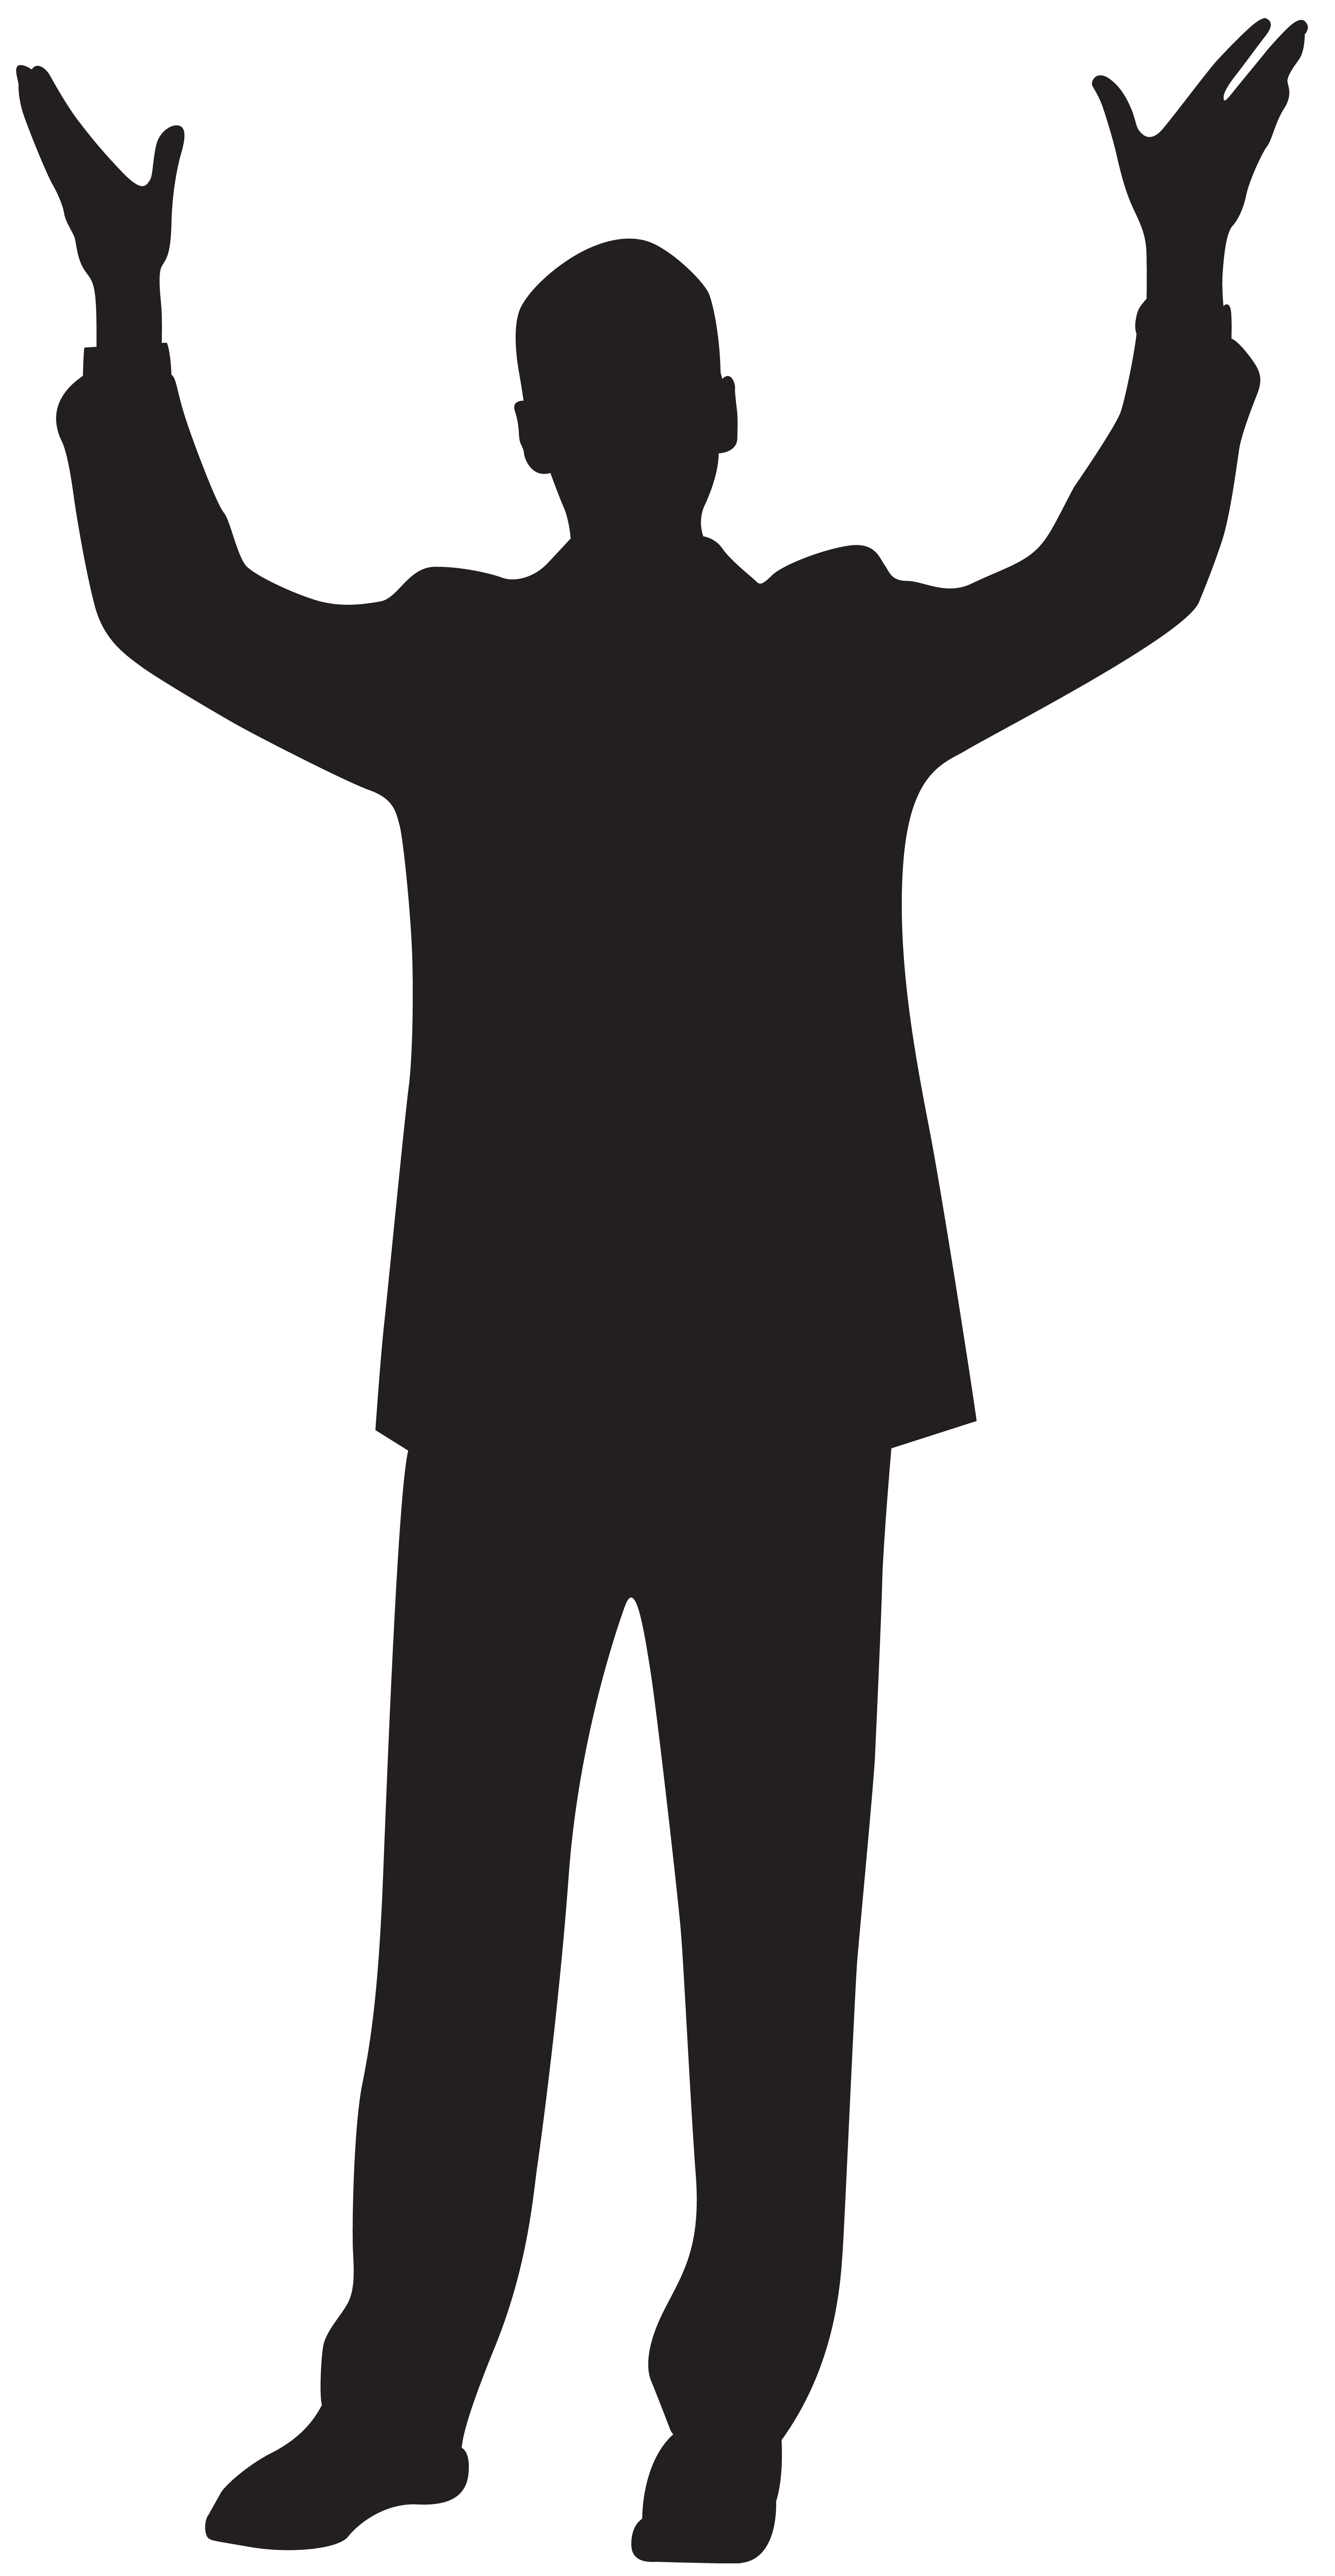 Man with Hands Up Silhouette Clip Art Image